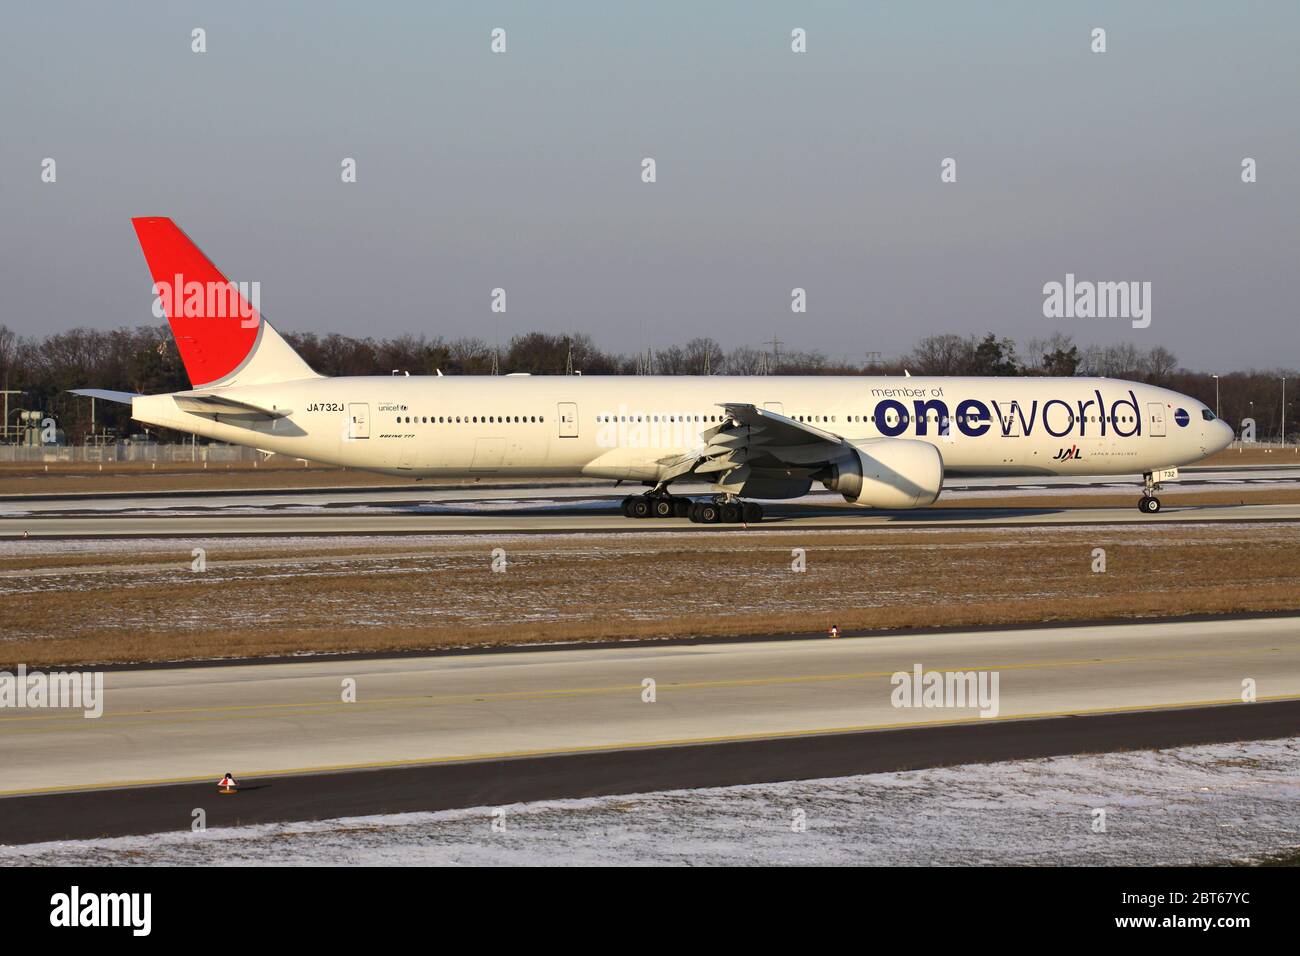 JAL Japan Airlines Boeing 777-300 in special oneworld livery with 